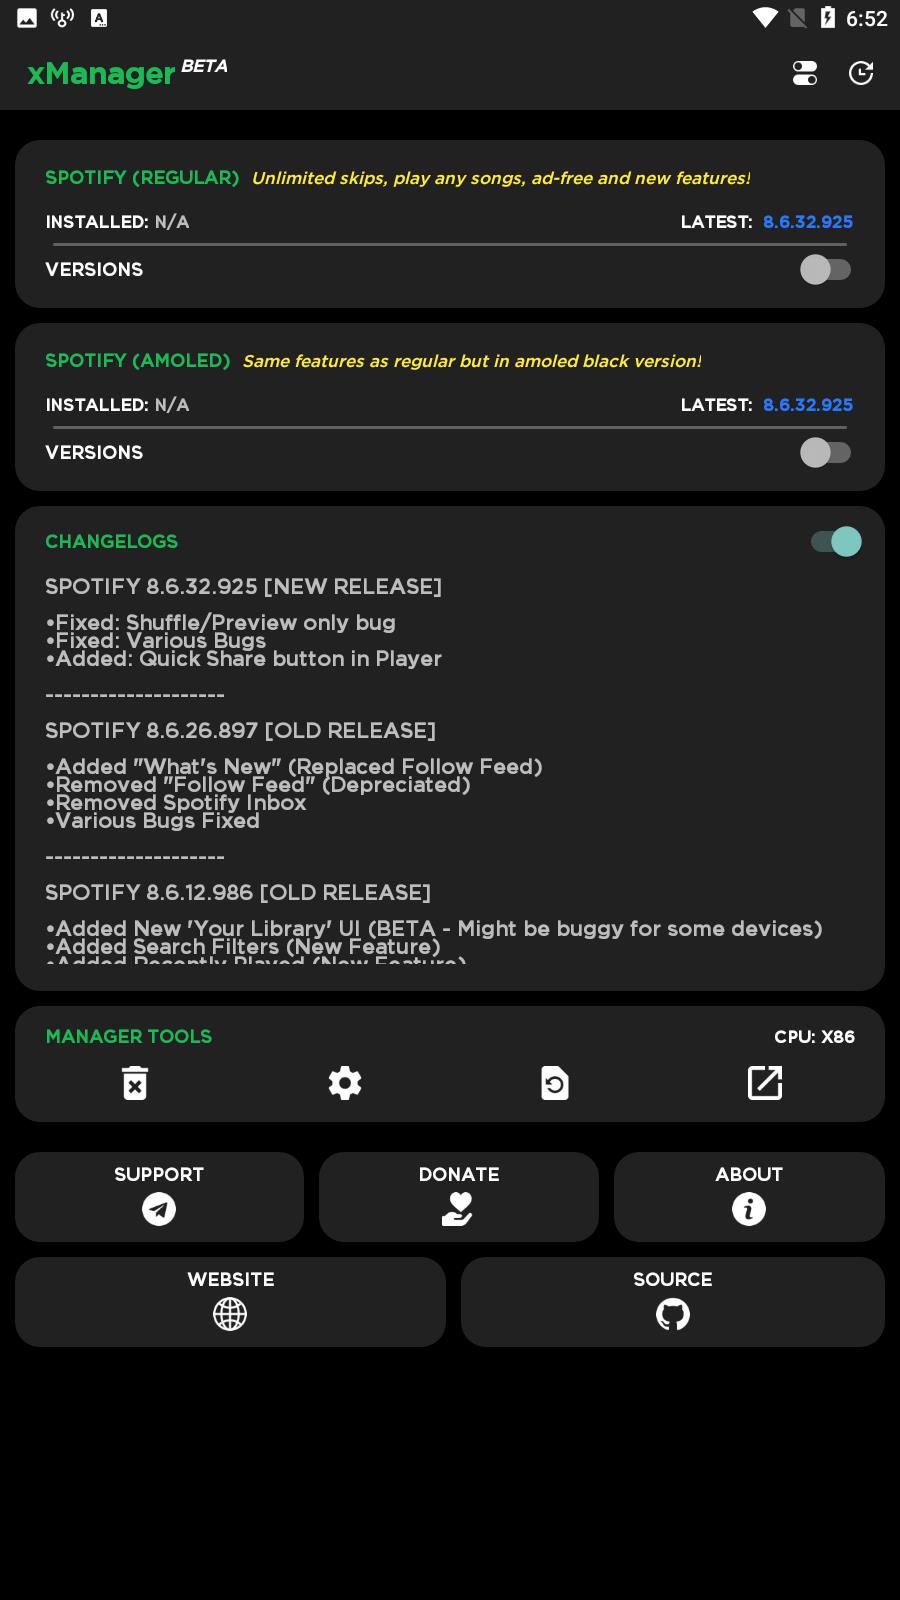 xManager For Spotify Screenshot4